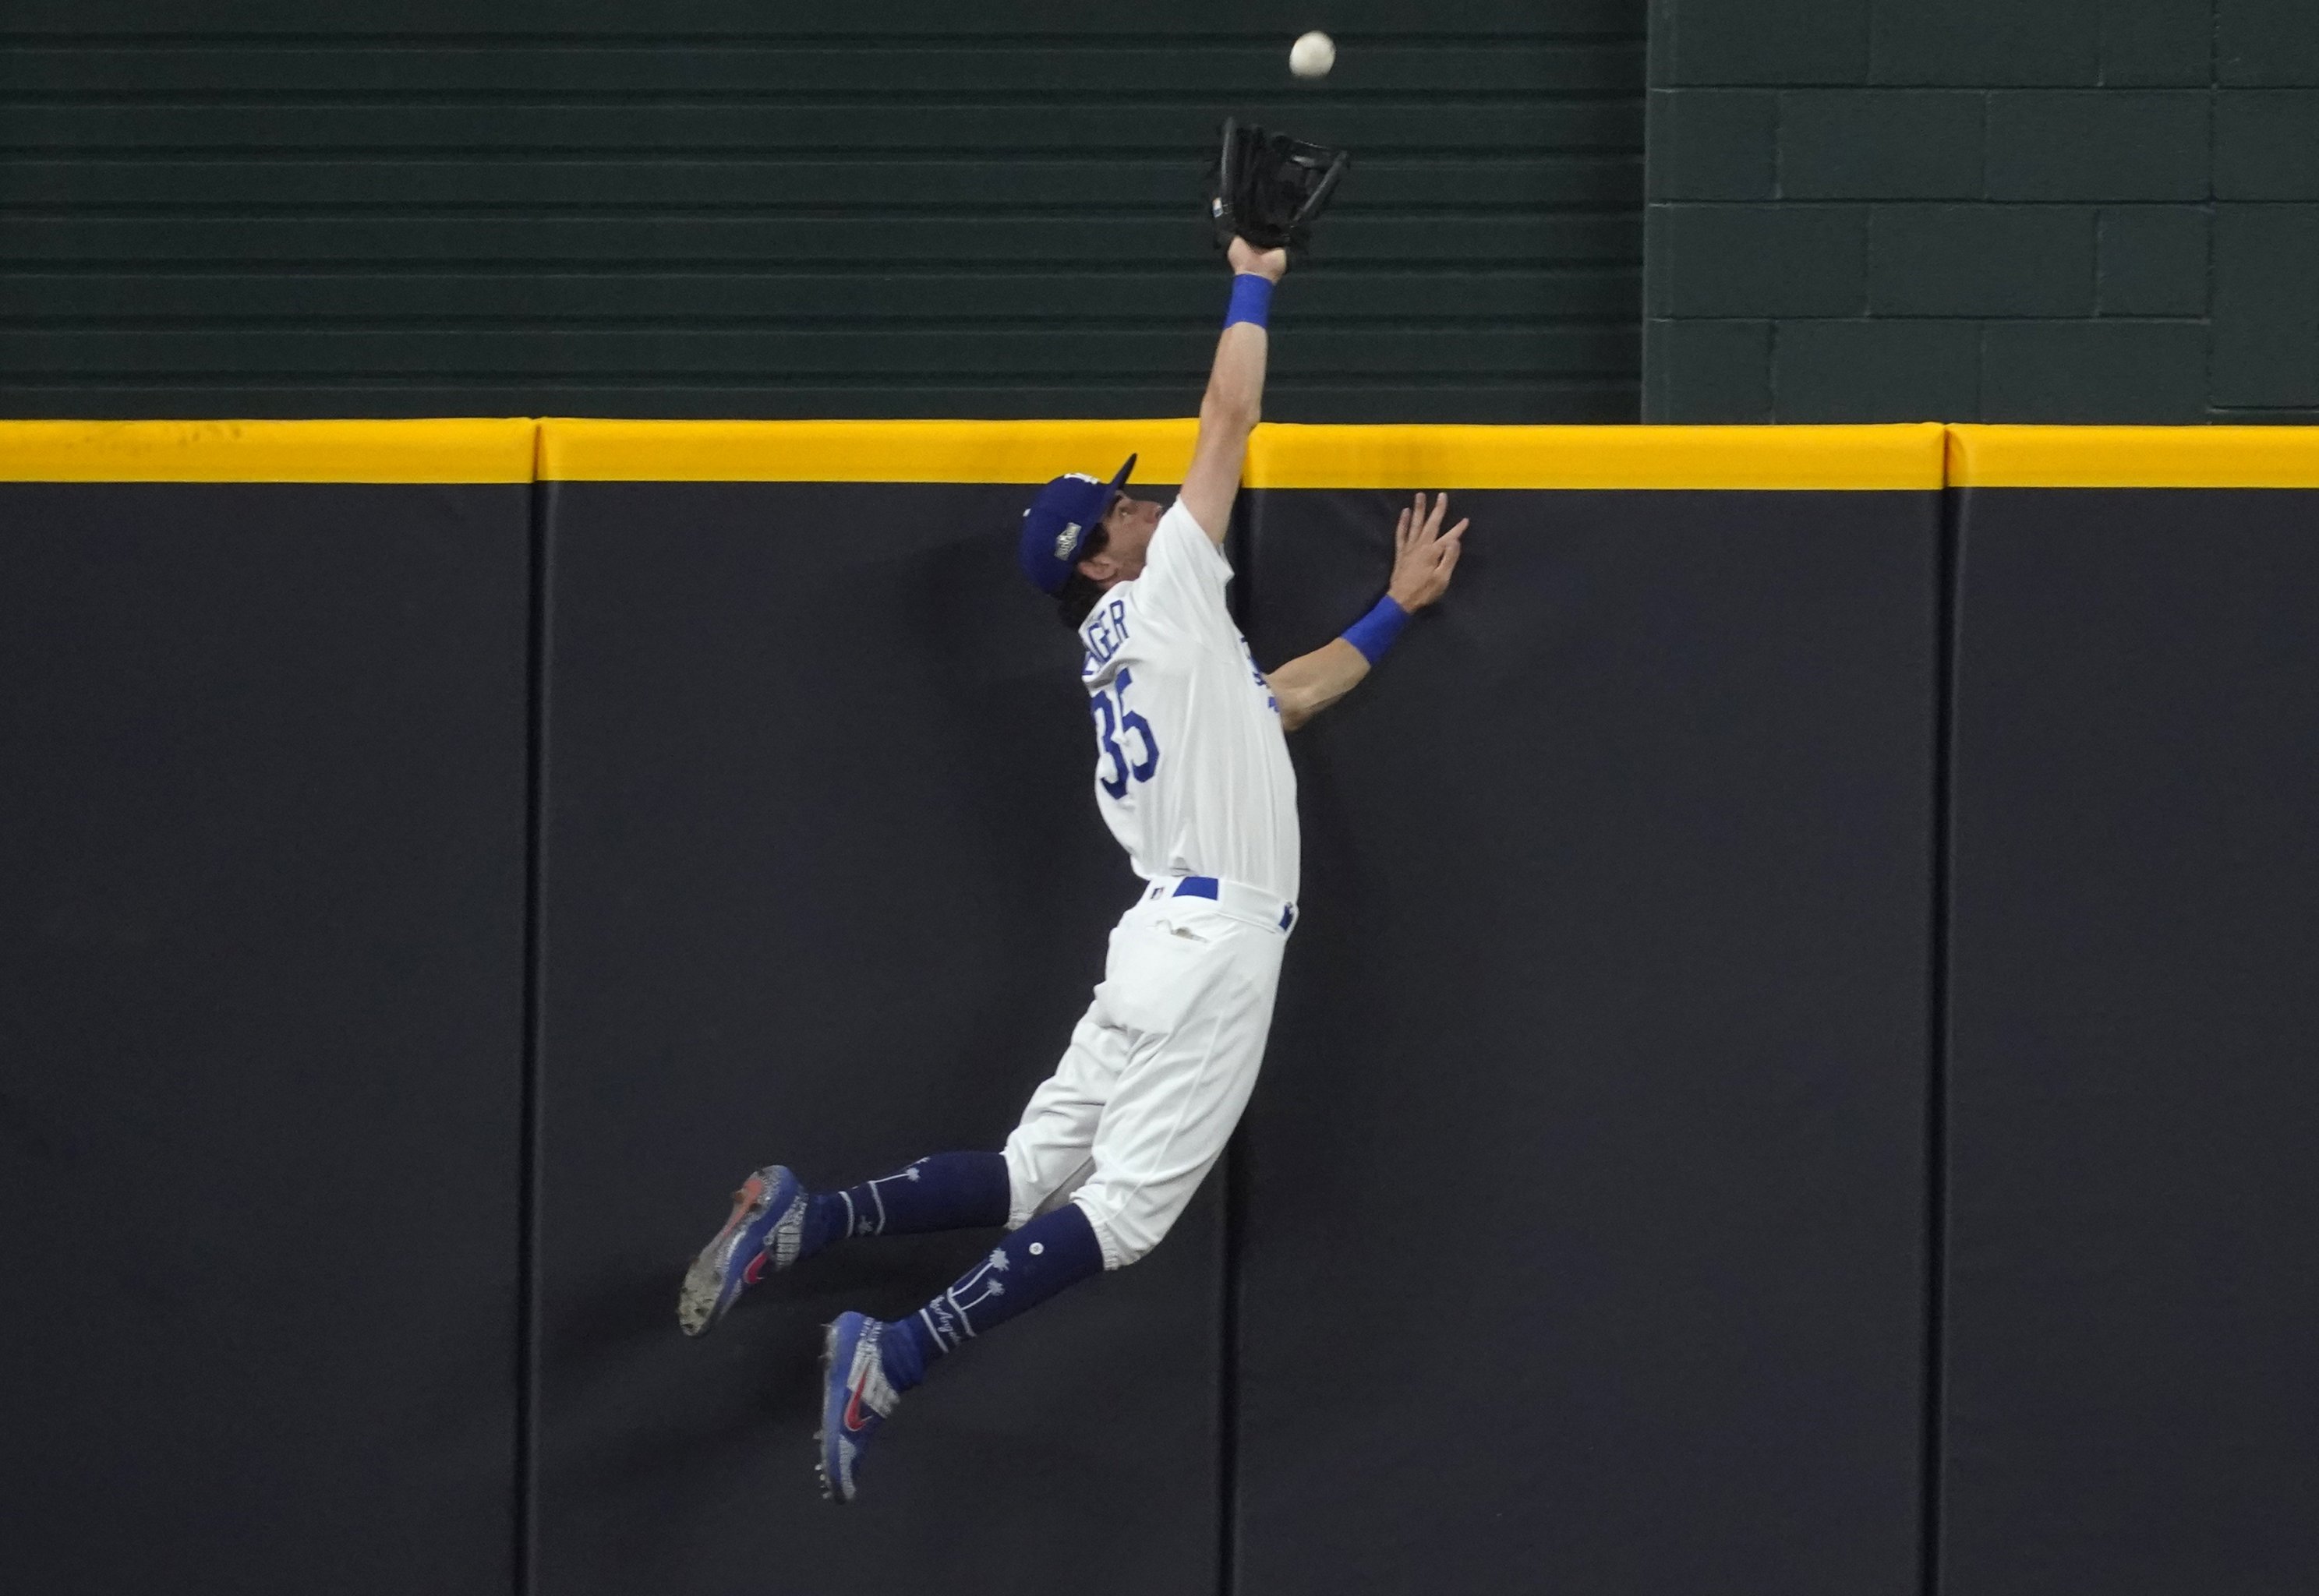 Fans applaud Cody Bellinger's fiancée, Chase, as she shows off her athletic  prowess with an epic water dive catch